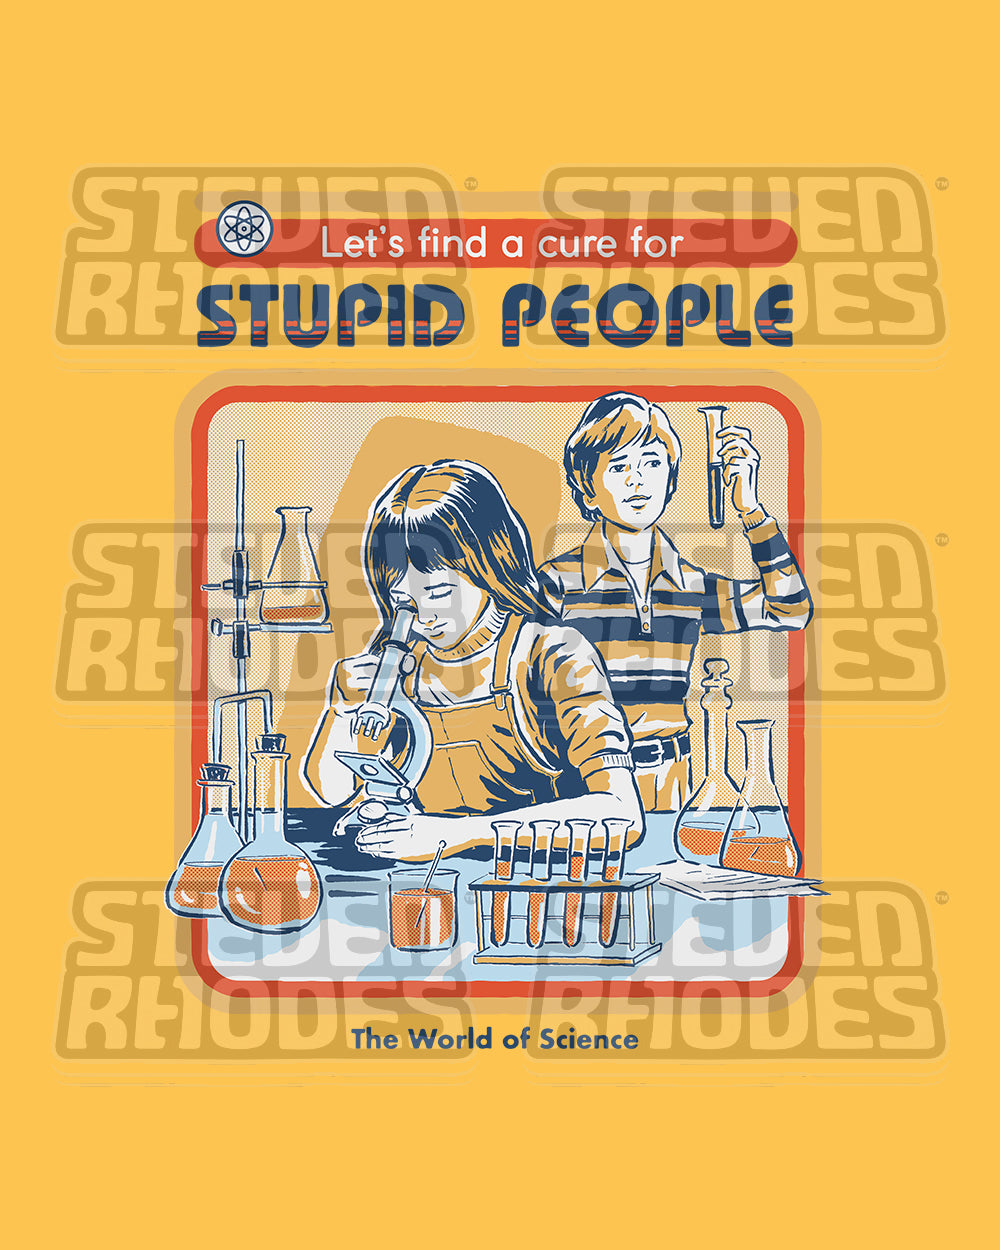 Let's Find a Cure for Stupid People Sweater Australia Online #colour_yellow